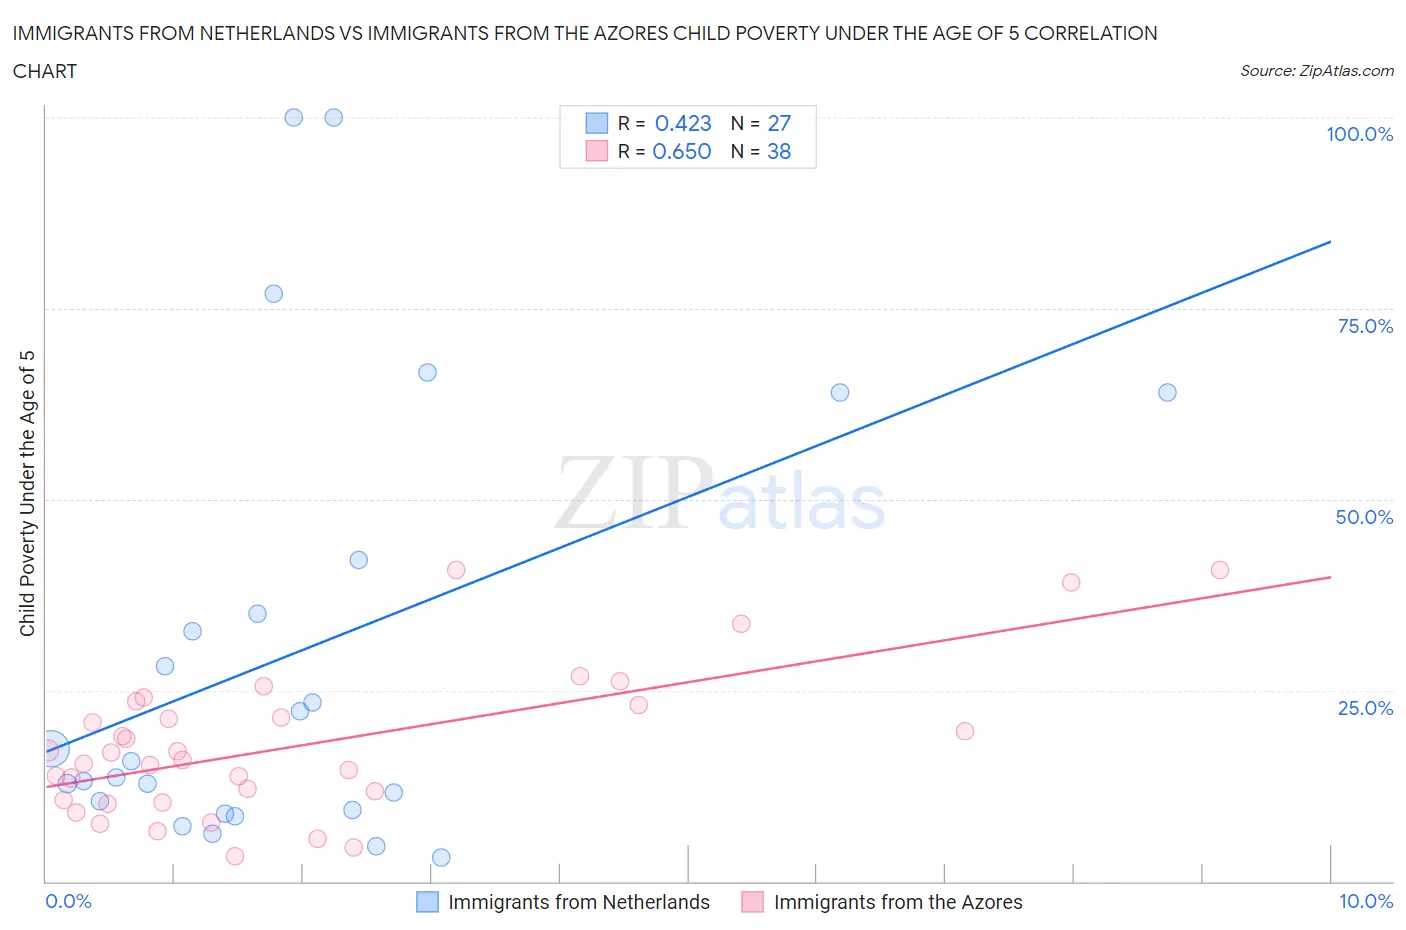 Immigrants from Netherlands vs Immigrants from the Azores Child Poverty Under the Age of 5